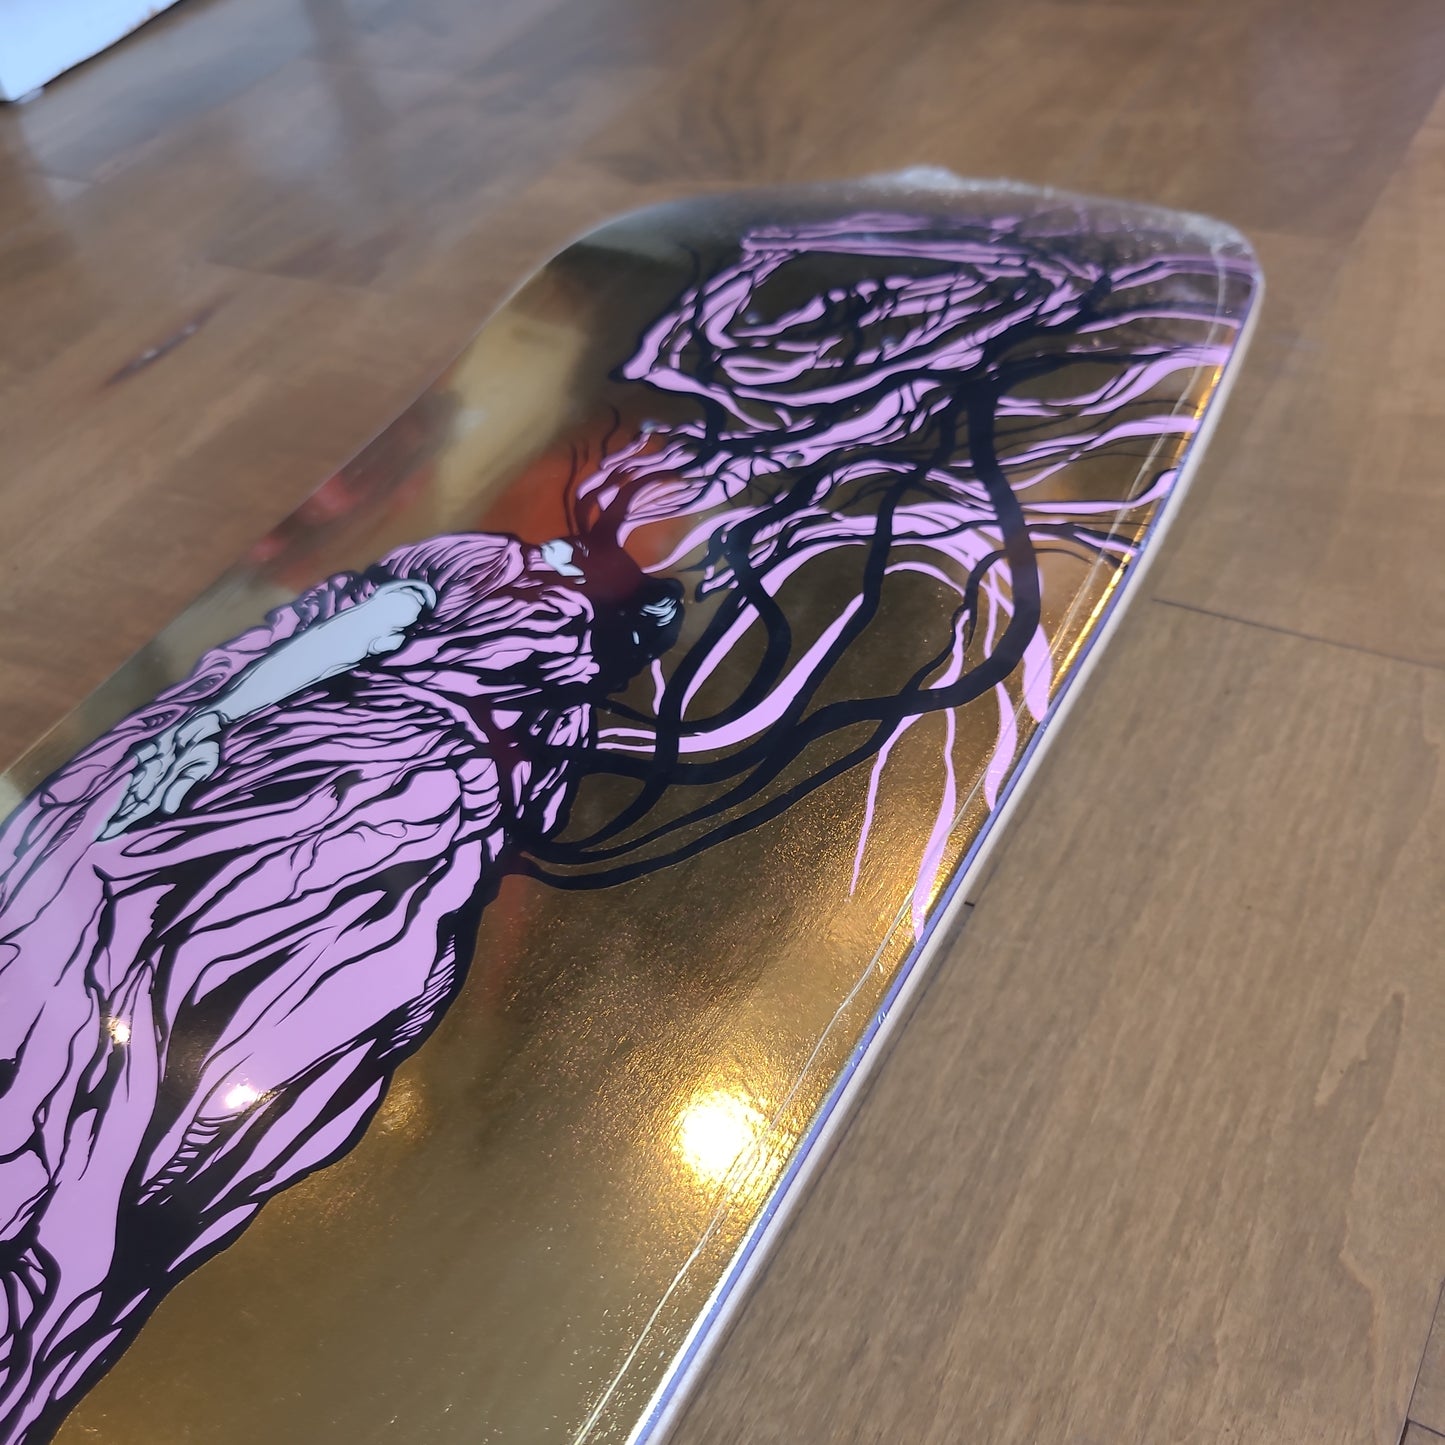 Welcome - Transcend on Son of Moontrimmer 8.21" Shaped Deck